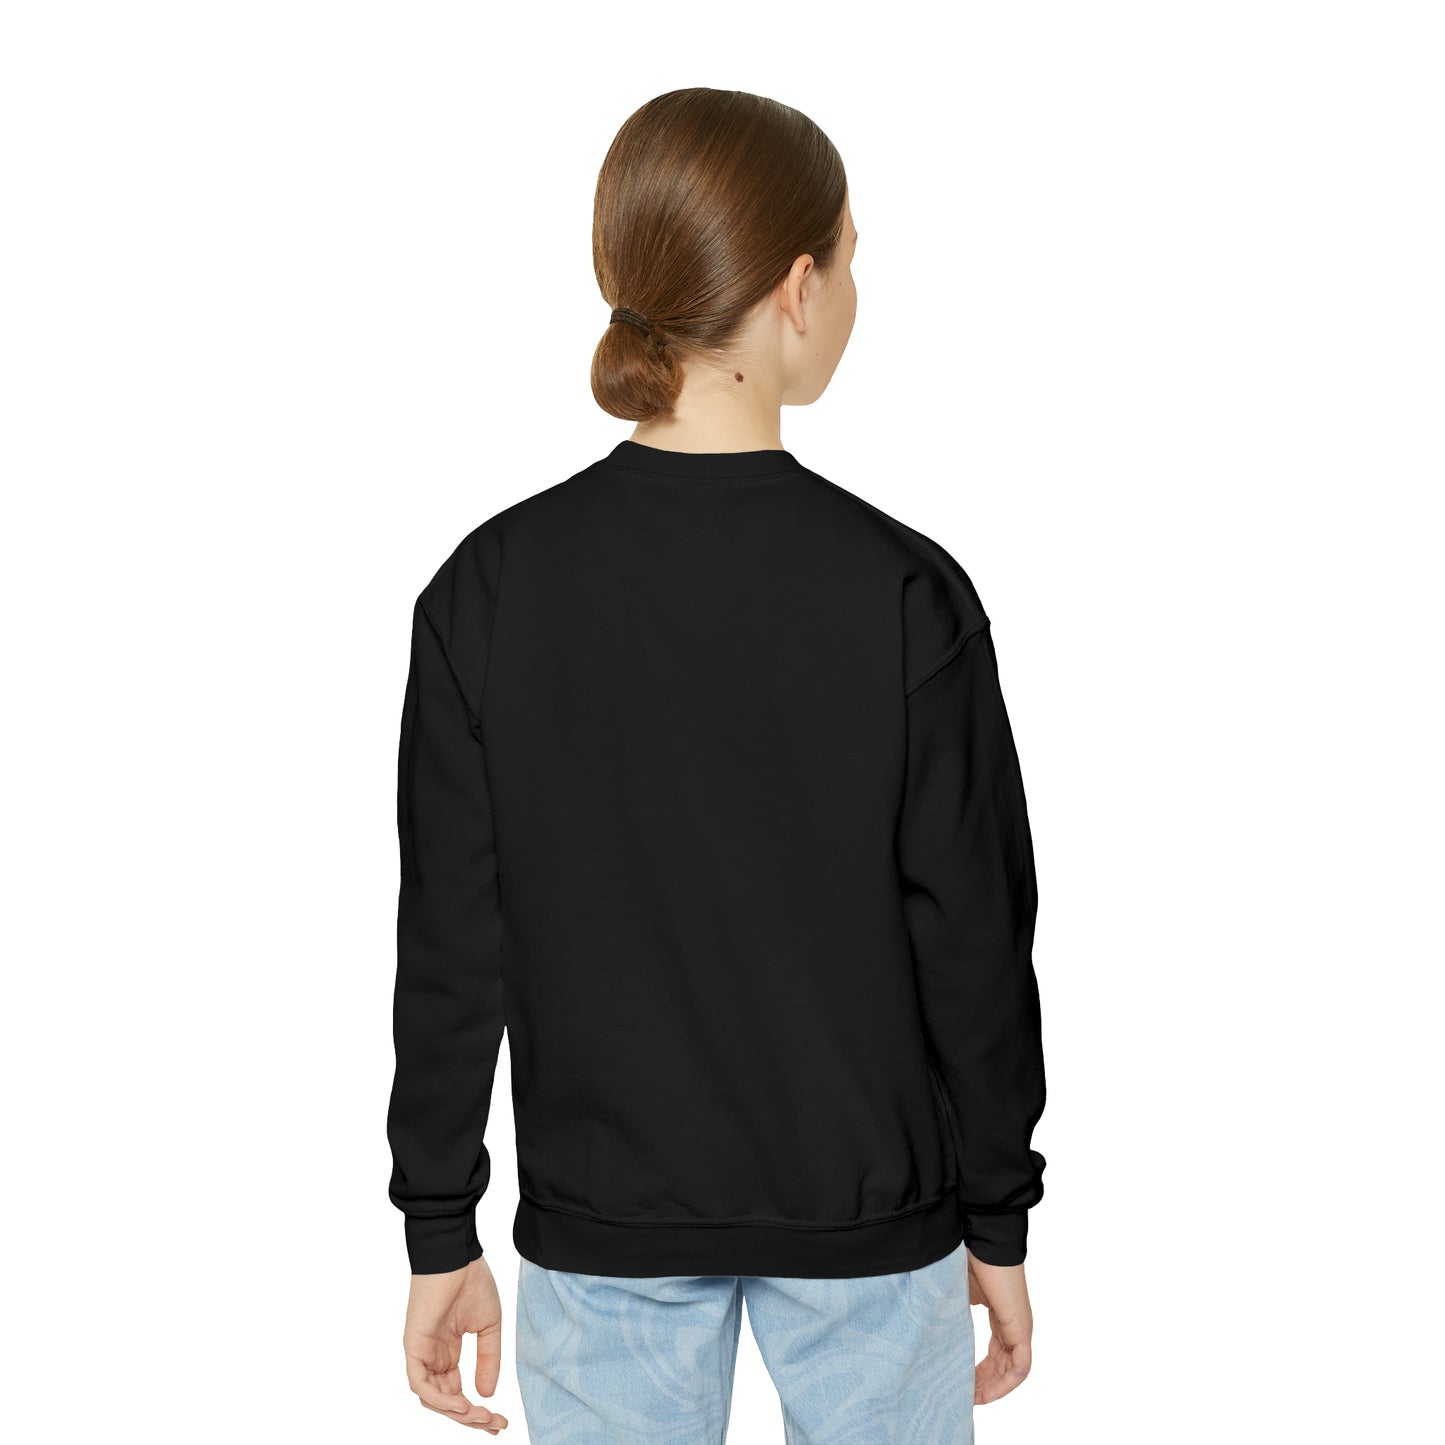 Fall Is In The Air | Youth Crewneck Sweatshirt